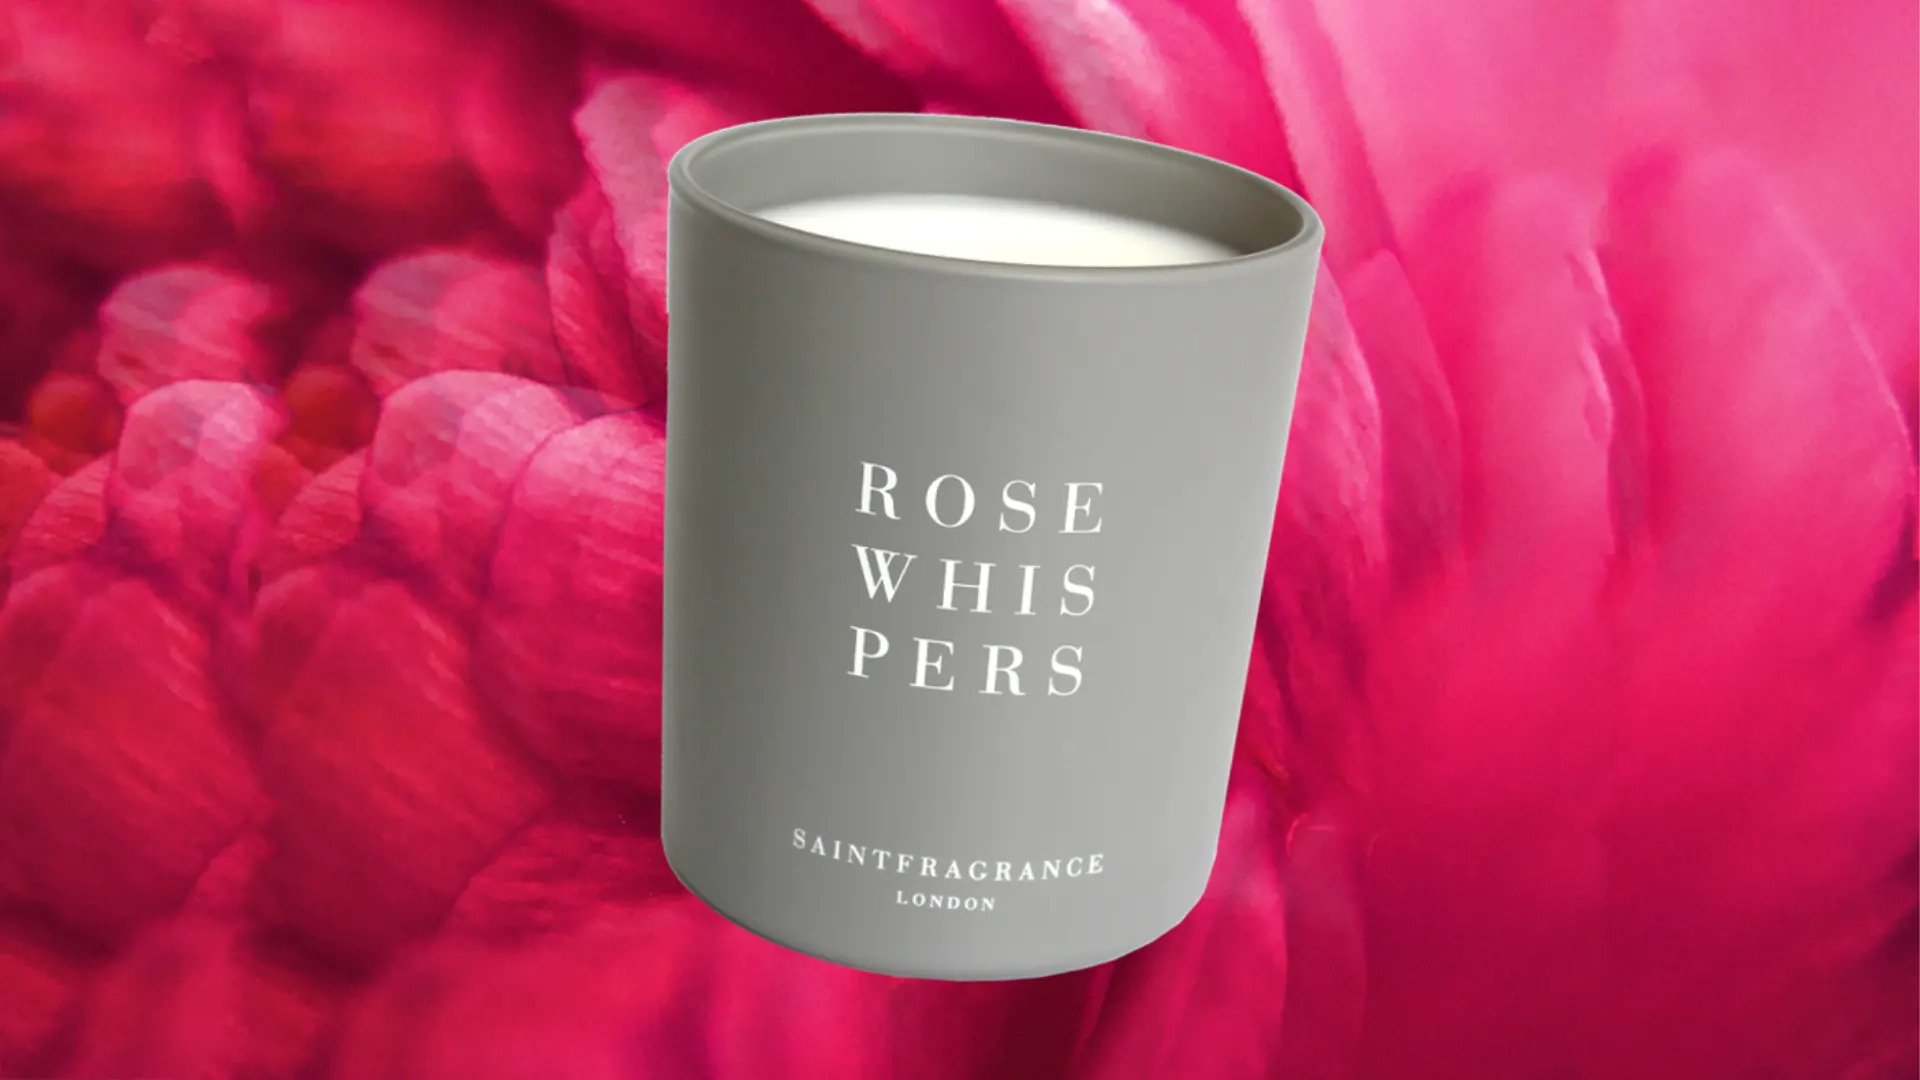 Saint Fragrance Rose Whispers scented candle on a pink petal background